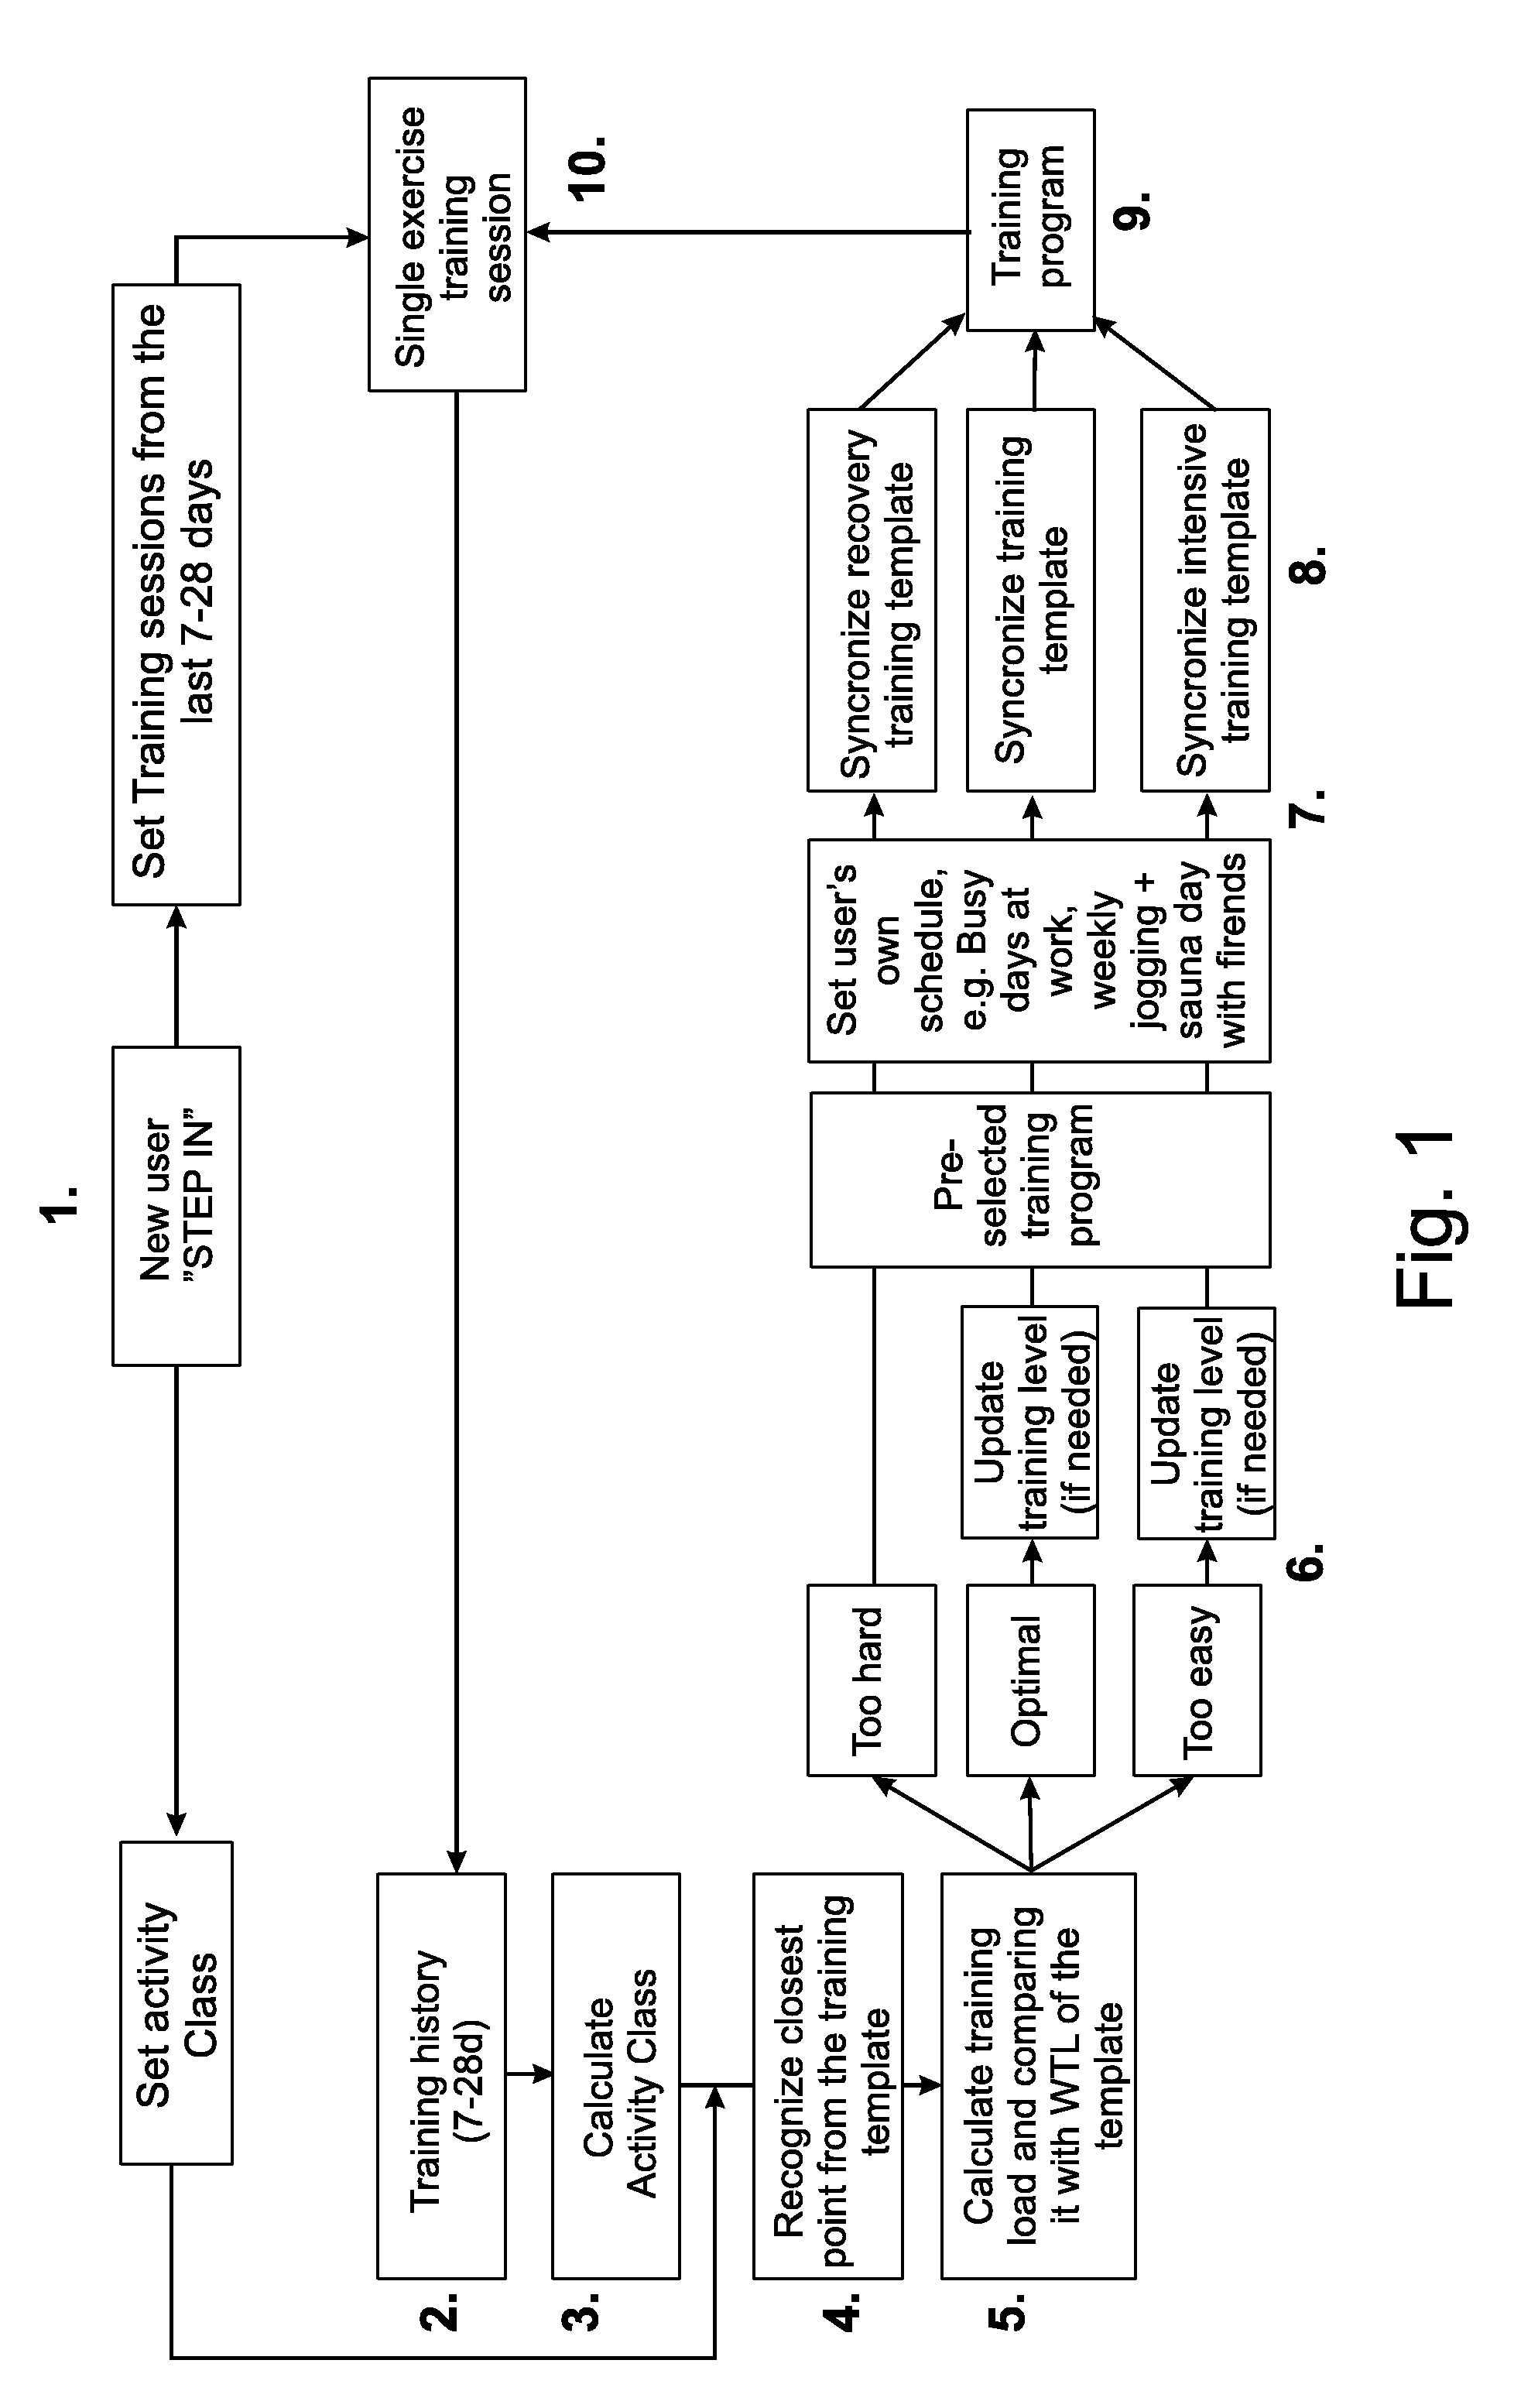 Method and System for Controlling Training